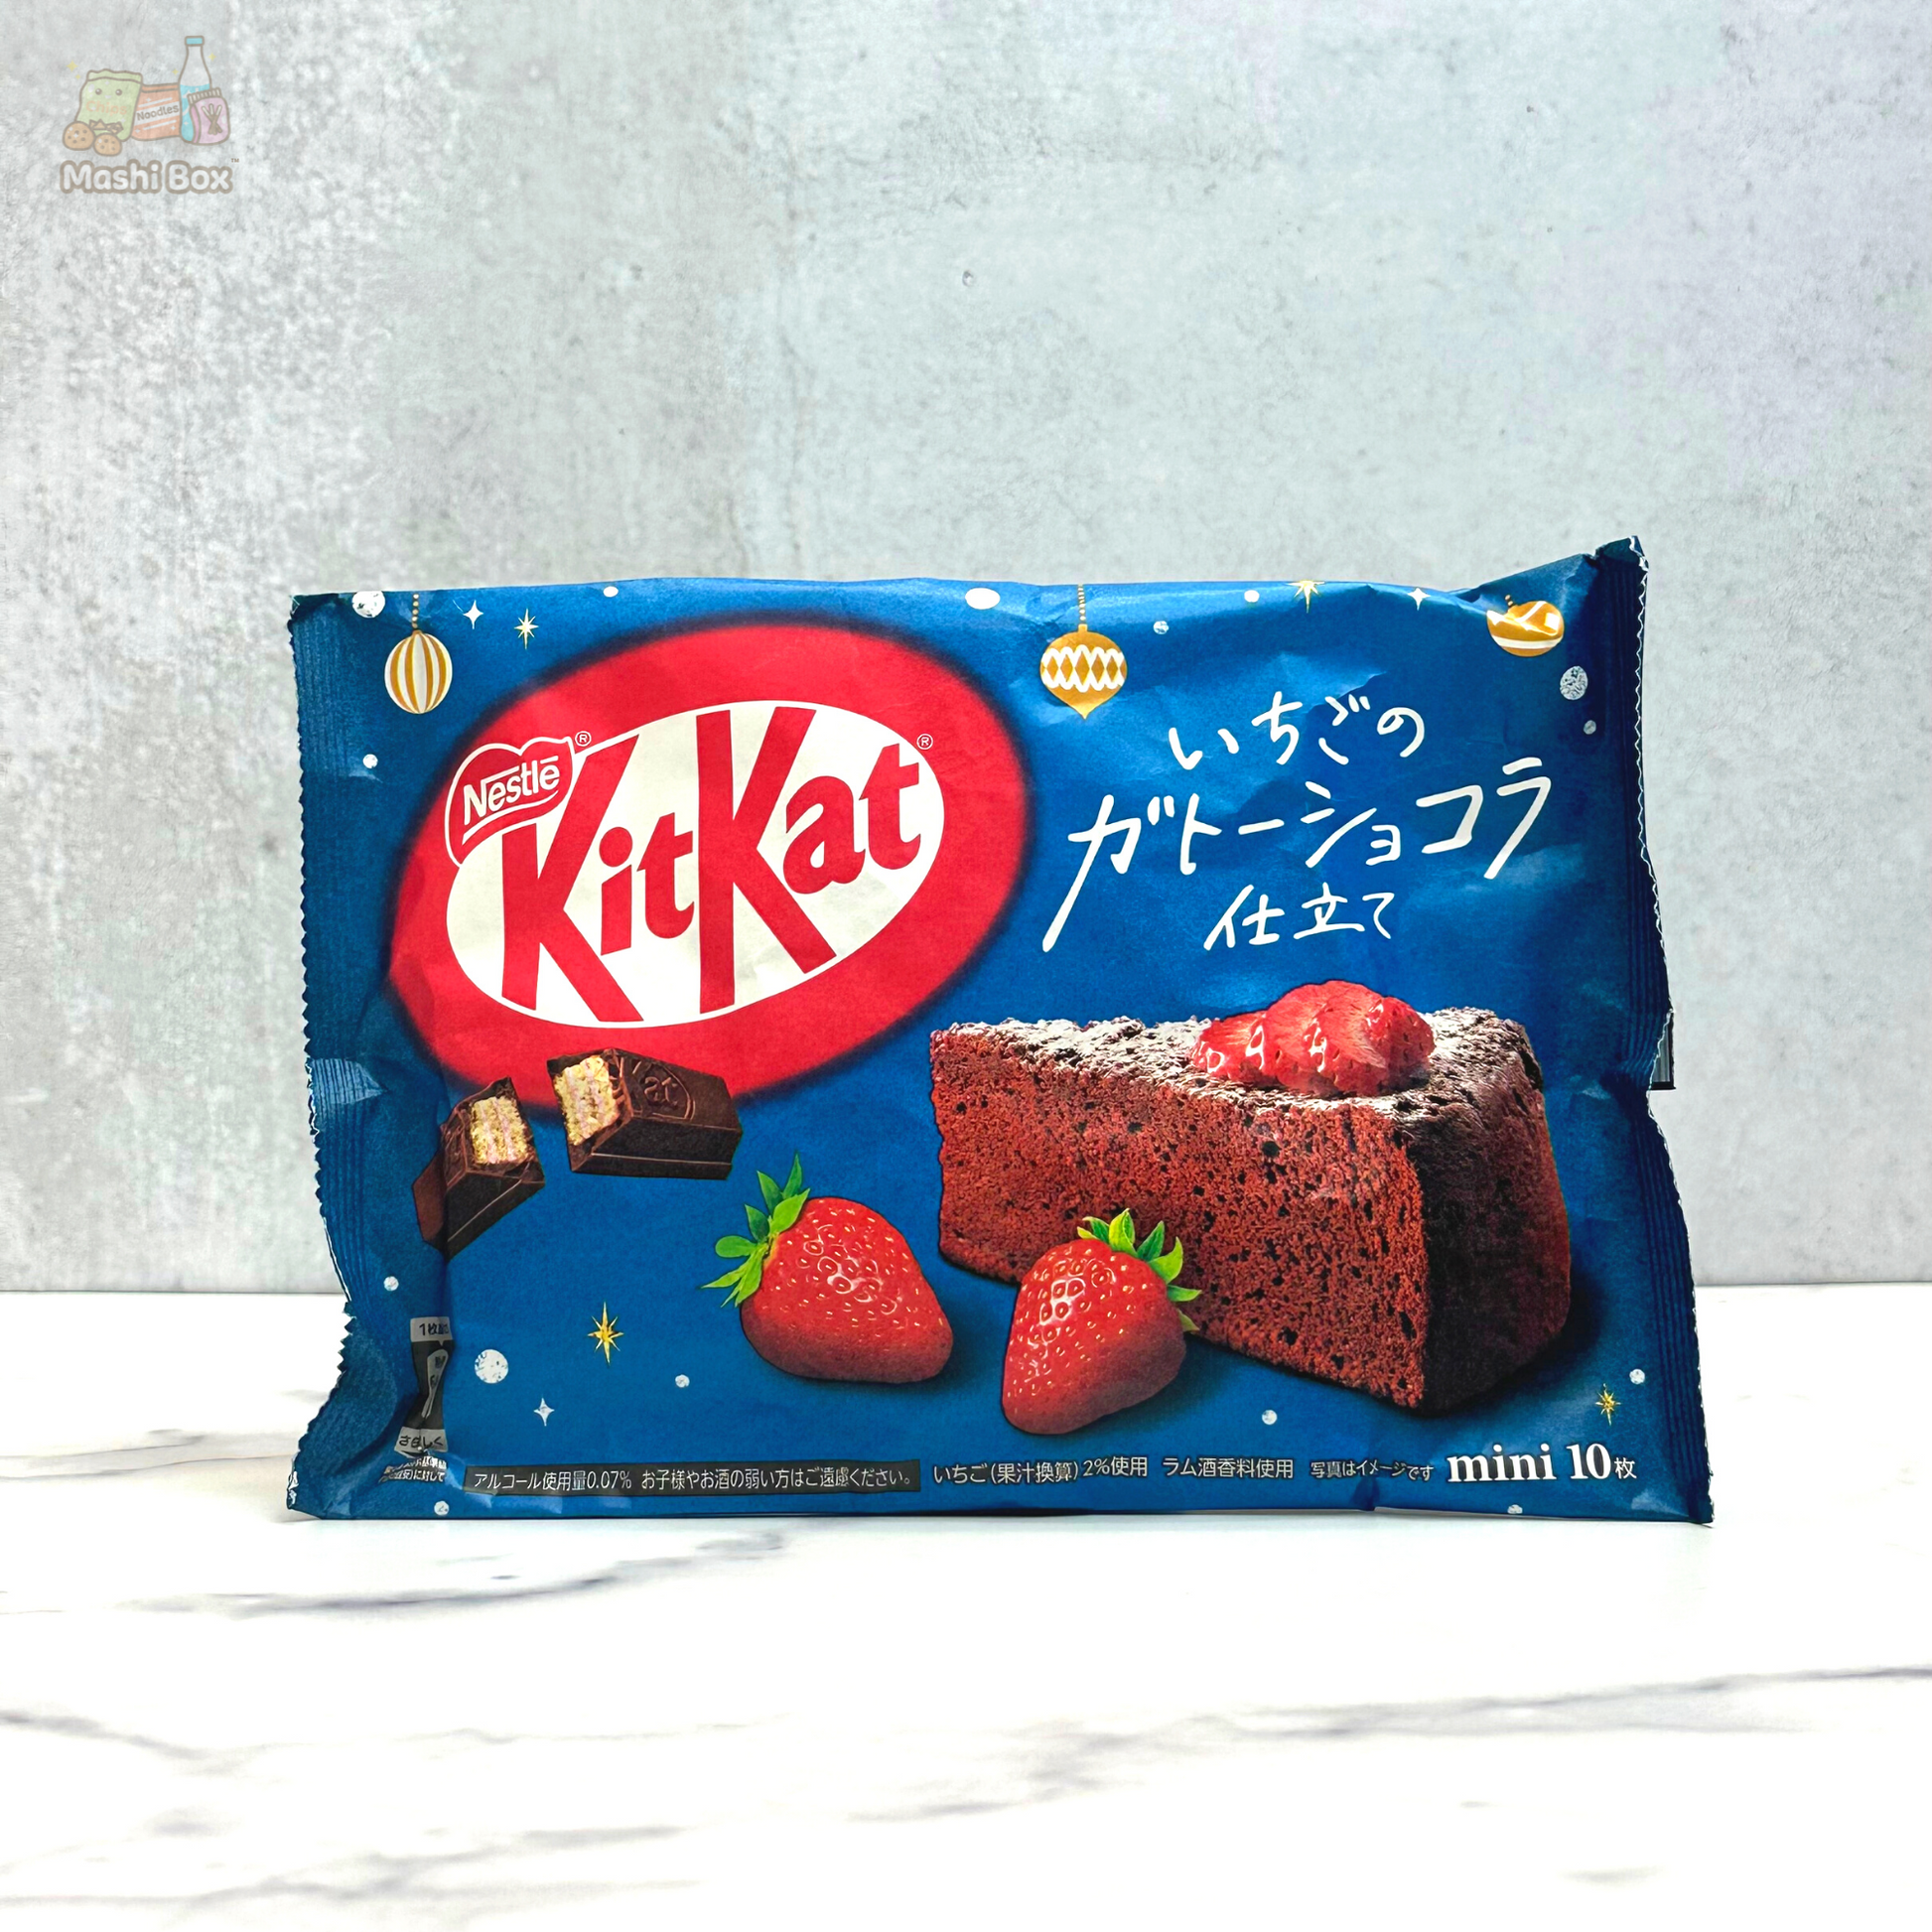 The KitKat Box - Mix of Flavors from Japan